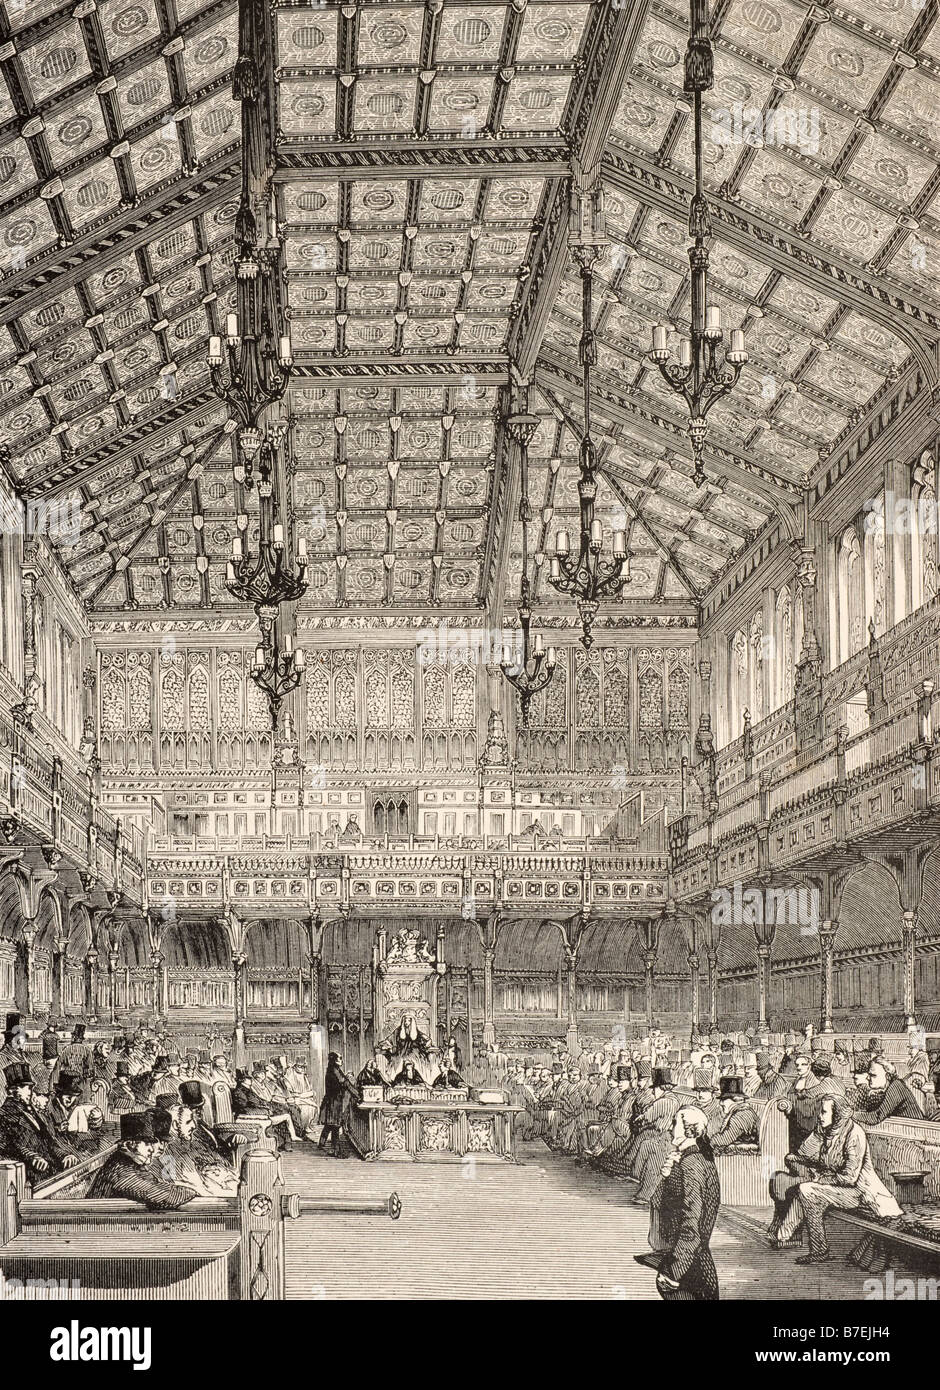 Interior of the House of Commons late 19th century London England Stock Photo